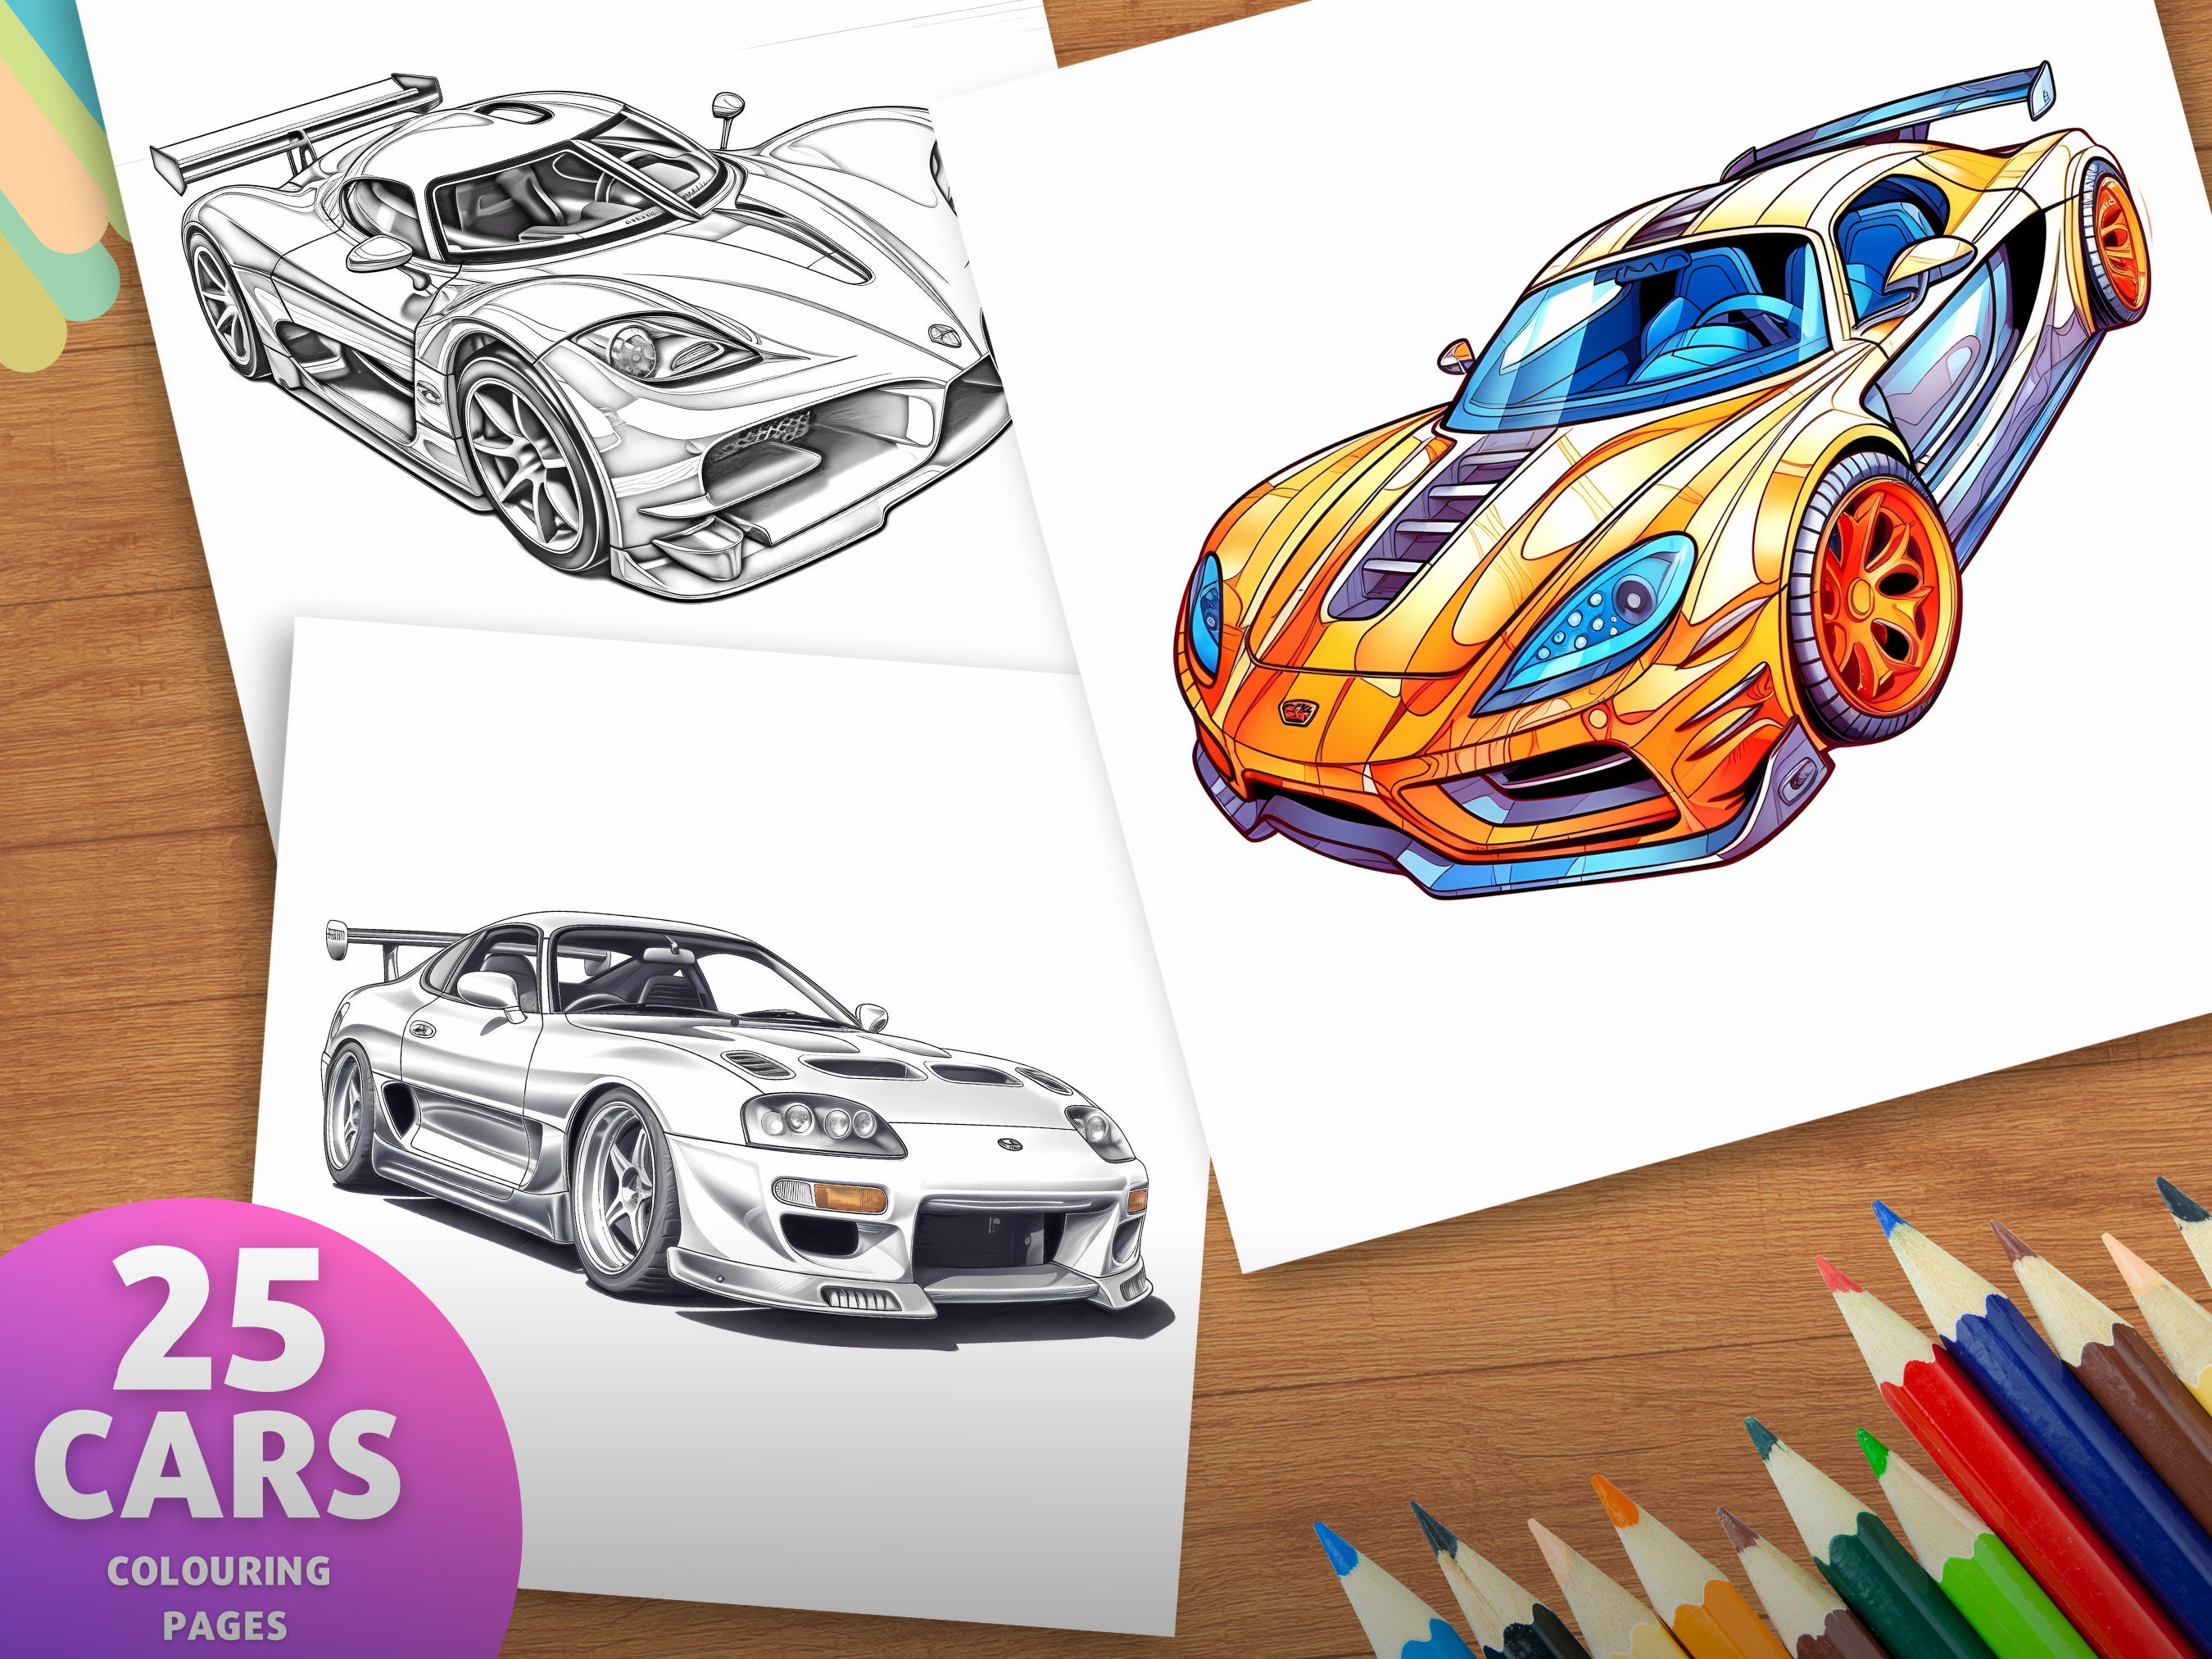 Different car models coloring pages for adults and kids printable